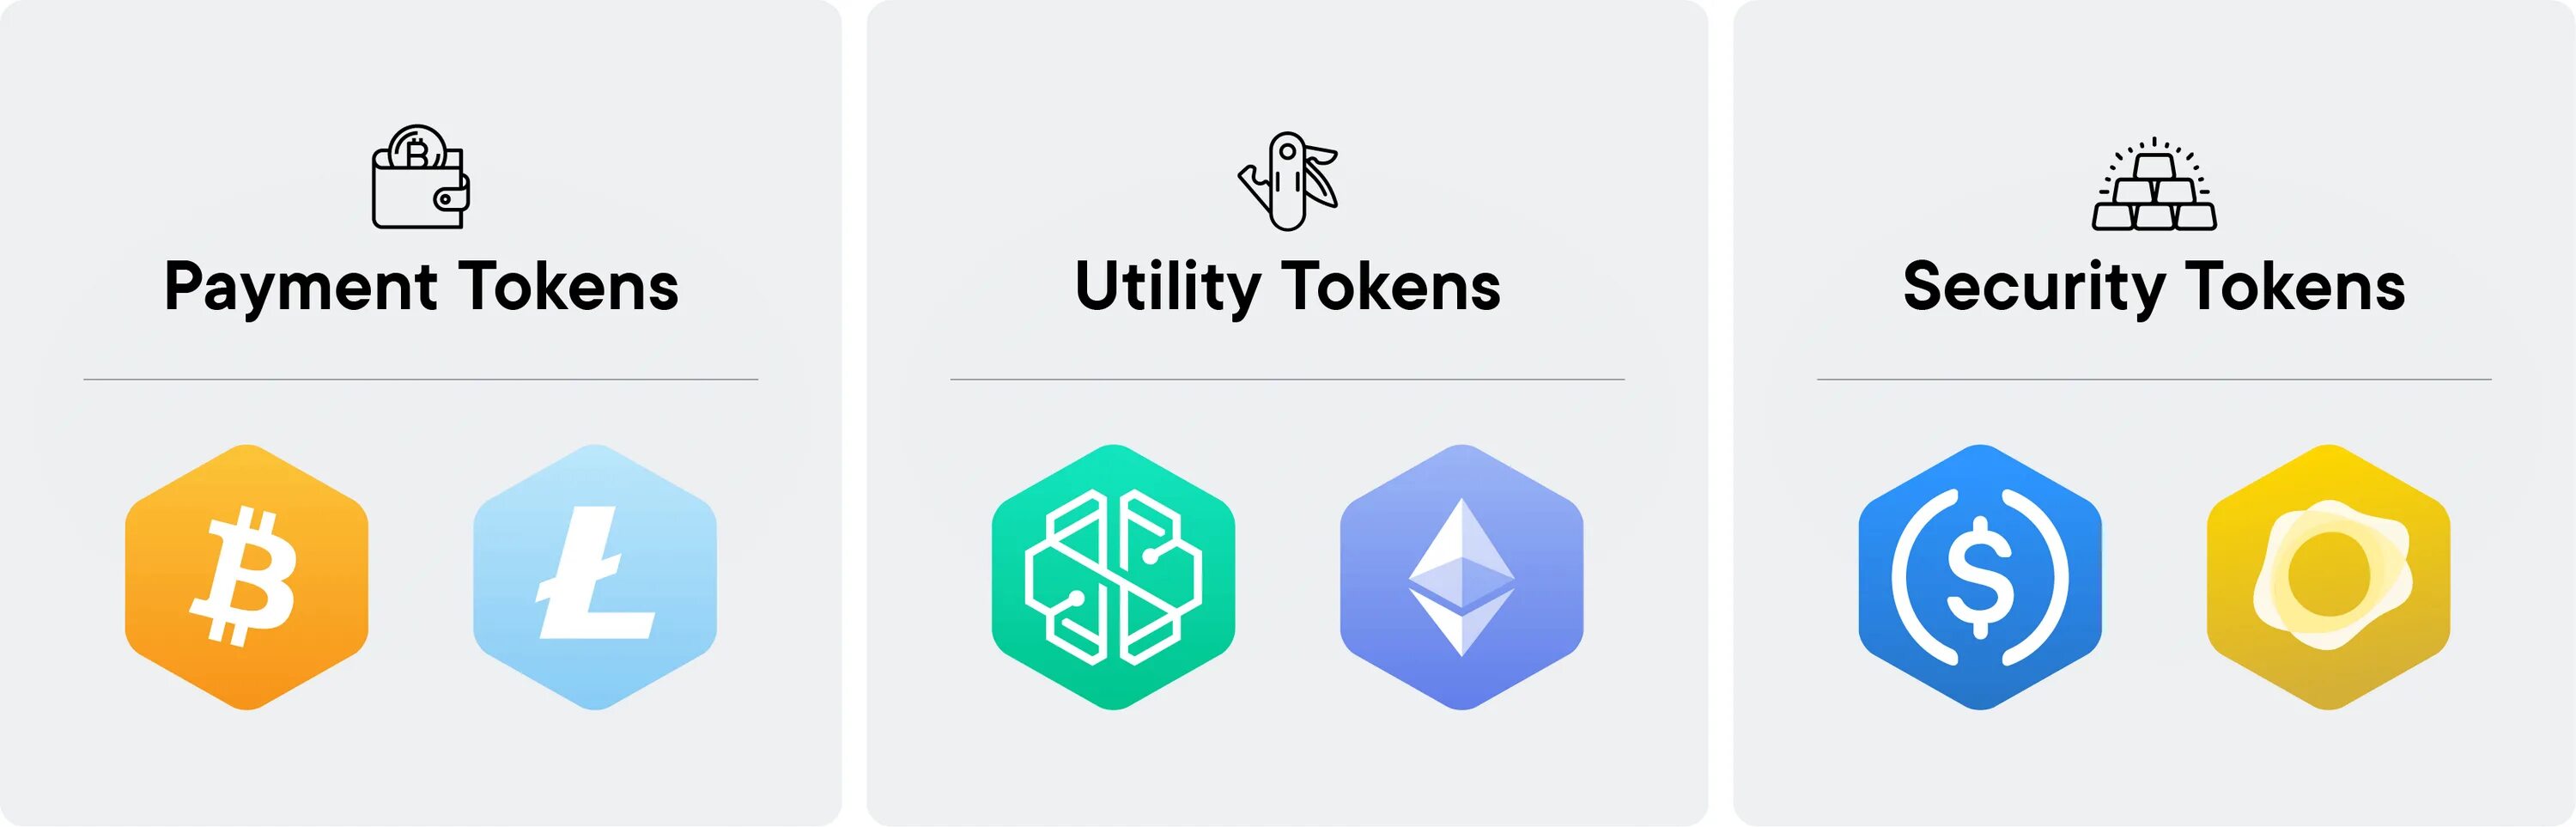 Backed tokens. Utility tokens. Виды токенов. Токены виды. Utility token примеры.